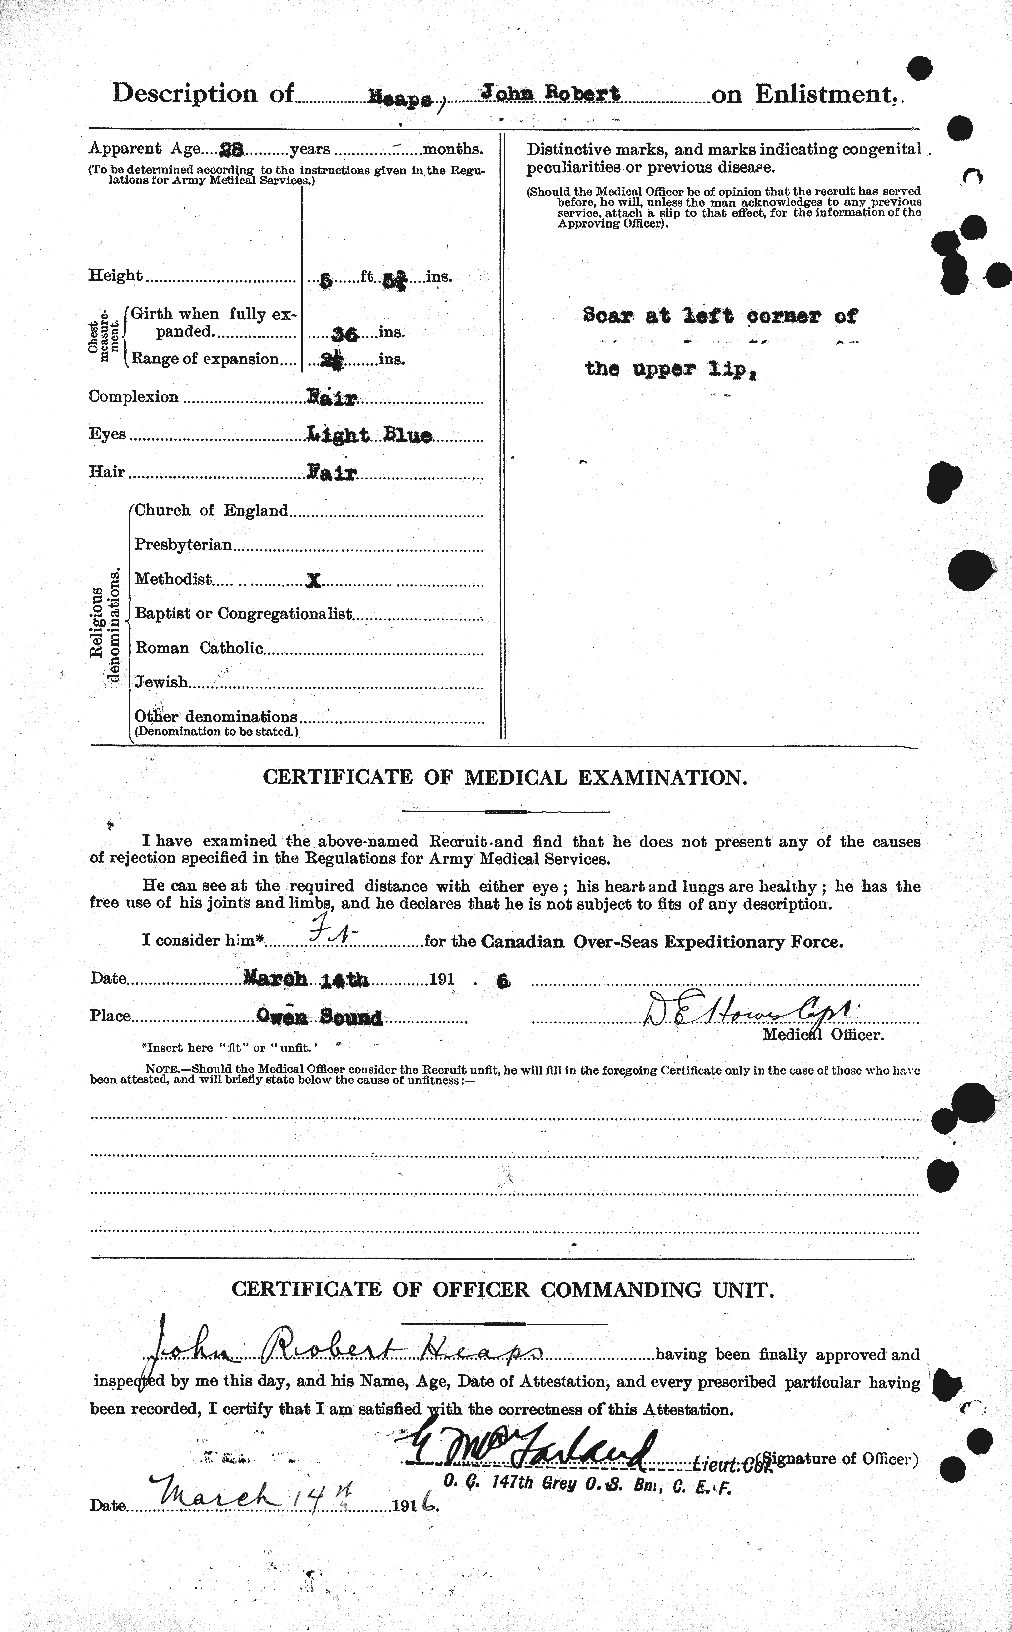 Personnel Records of the First World War - CEF 383991b